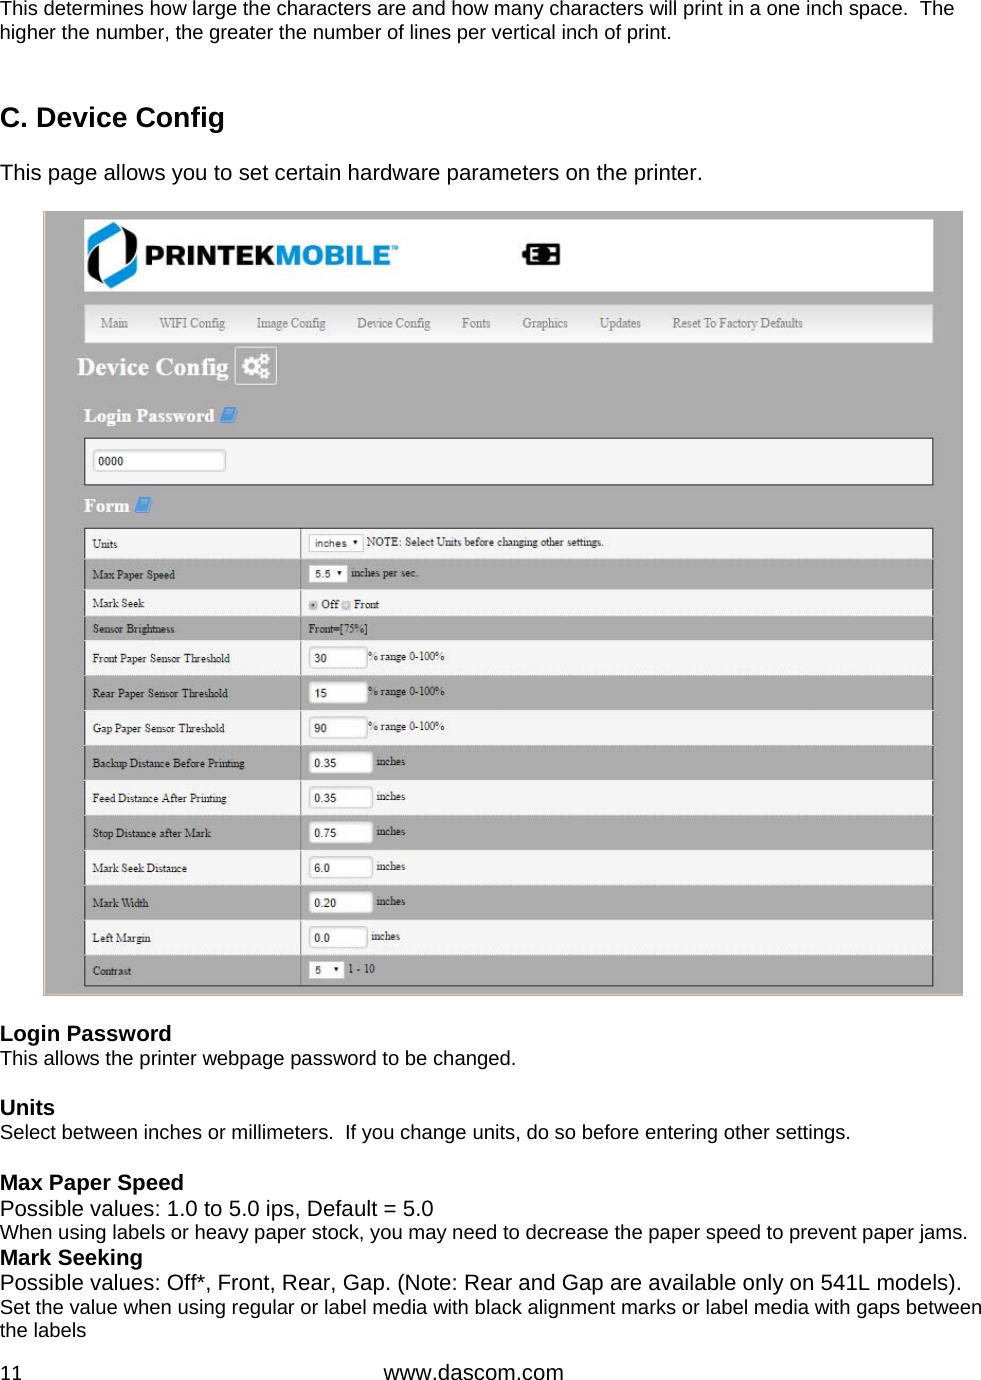  11www.dascom.com This determines how large the characters are and how many characters will print in a one inch space.  The higher the number, the greater the number of lines per vertical inch of print.  C. Device Config  This page allows you to set certain hardware parameters on the printer.    Login Password This allows the printer webpage password to be changed.  Units Select between inches or millimeters.  If you change units, do so before entering other settings.  Max Paper Speed Possible values: 1.0 to 5.0 ips, Default = 5.0 When using labels or heavy paper stock, you may need to decrease the paper speed to prevent paper jams. Mark Seeking Possible values: Off*, Front, Rear, Gap. (Note: Rear and Gap are available only on 541L models). Set the value when using regular or label media with black alignment marks or label media with gaps between the labels 